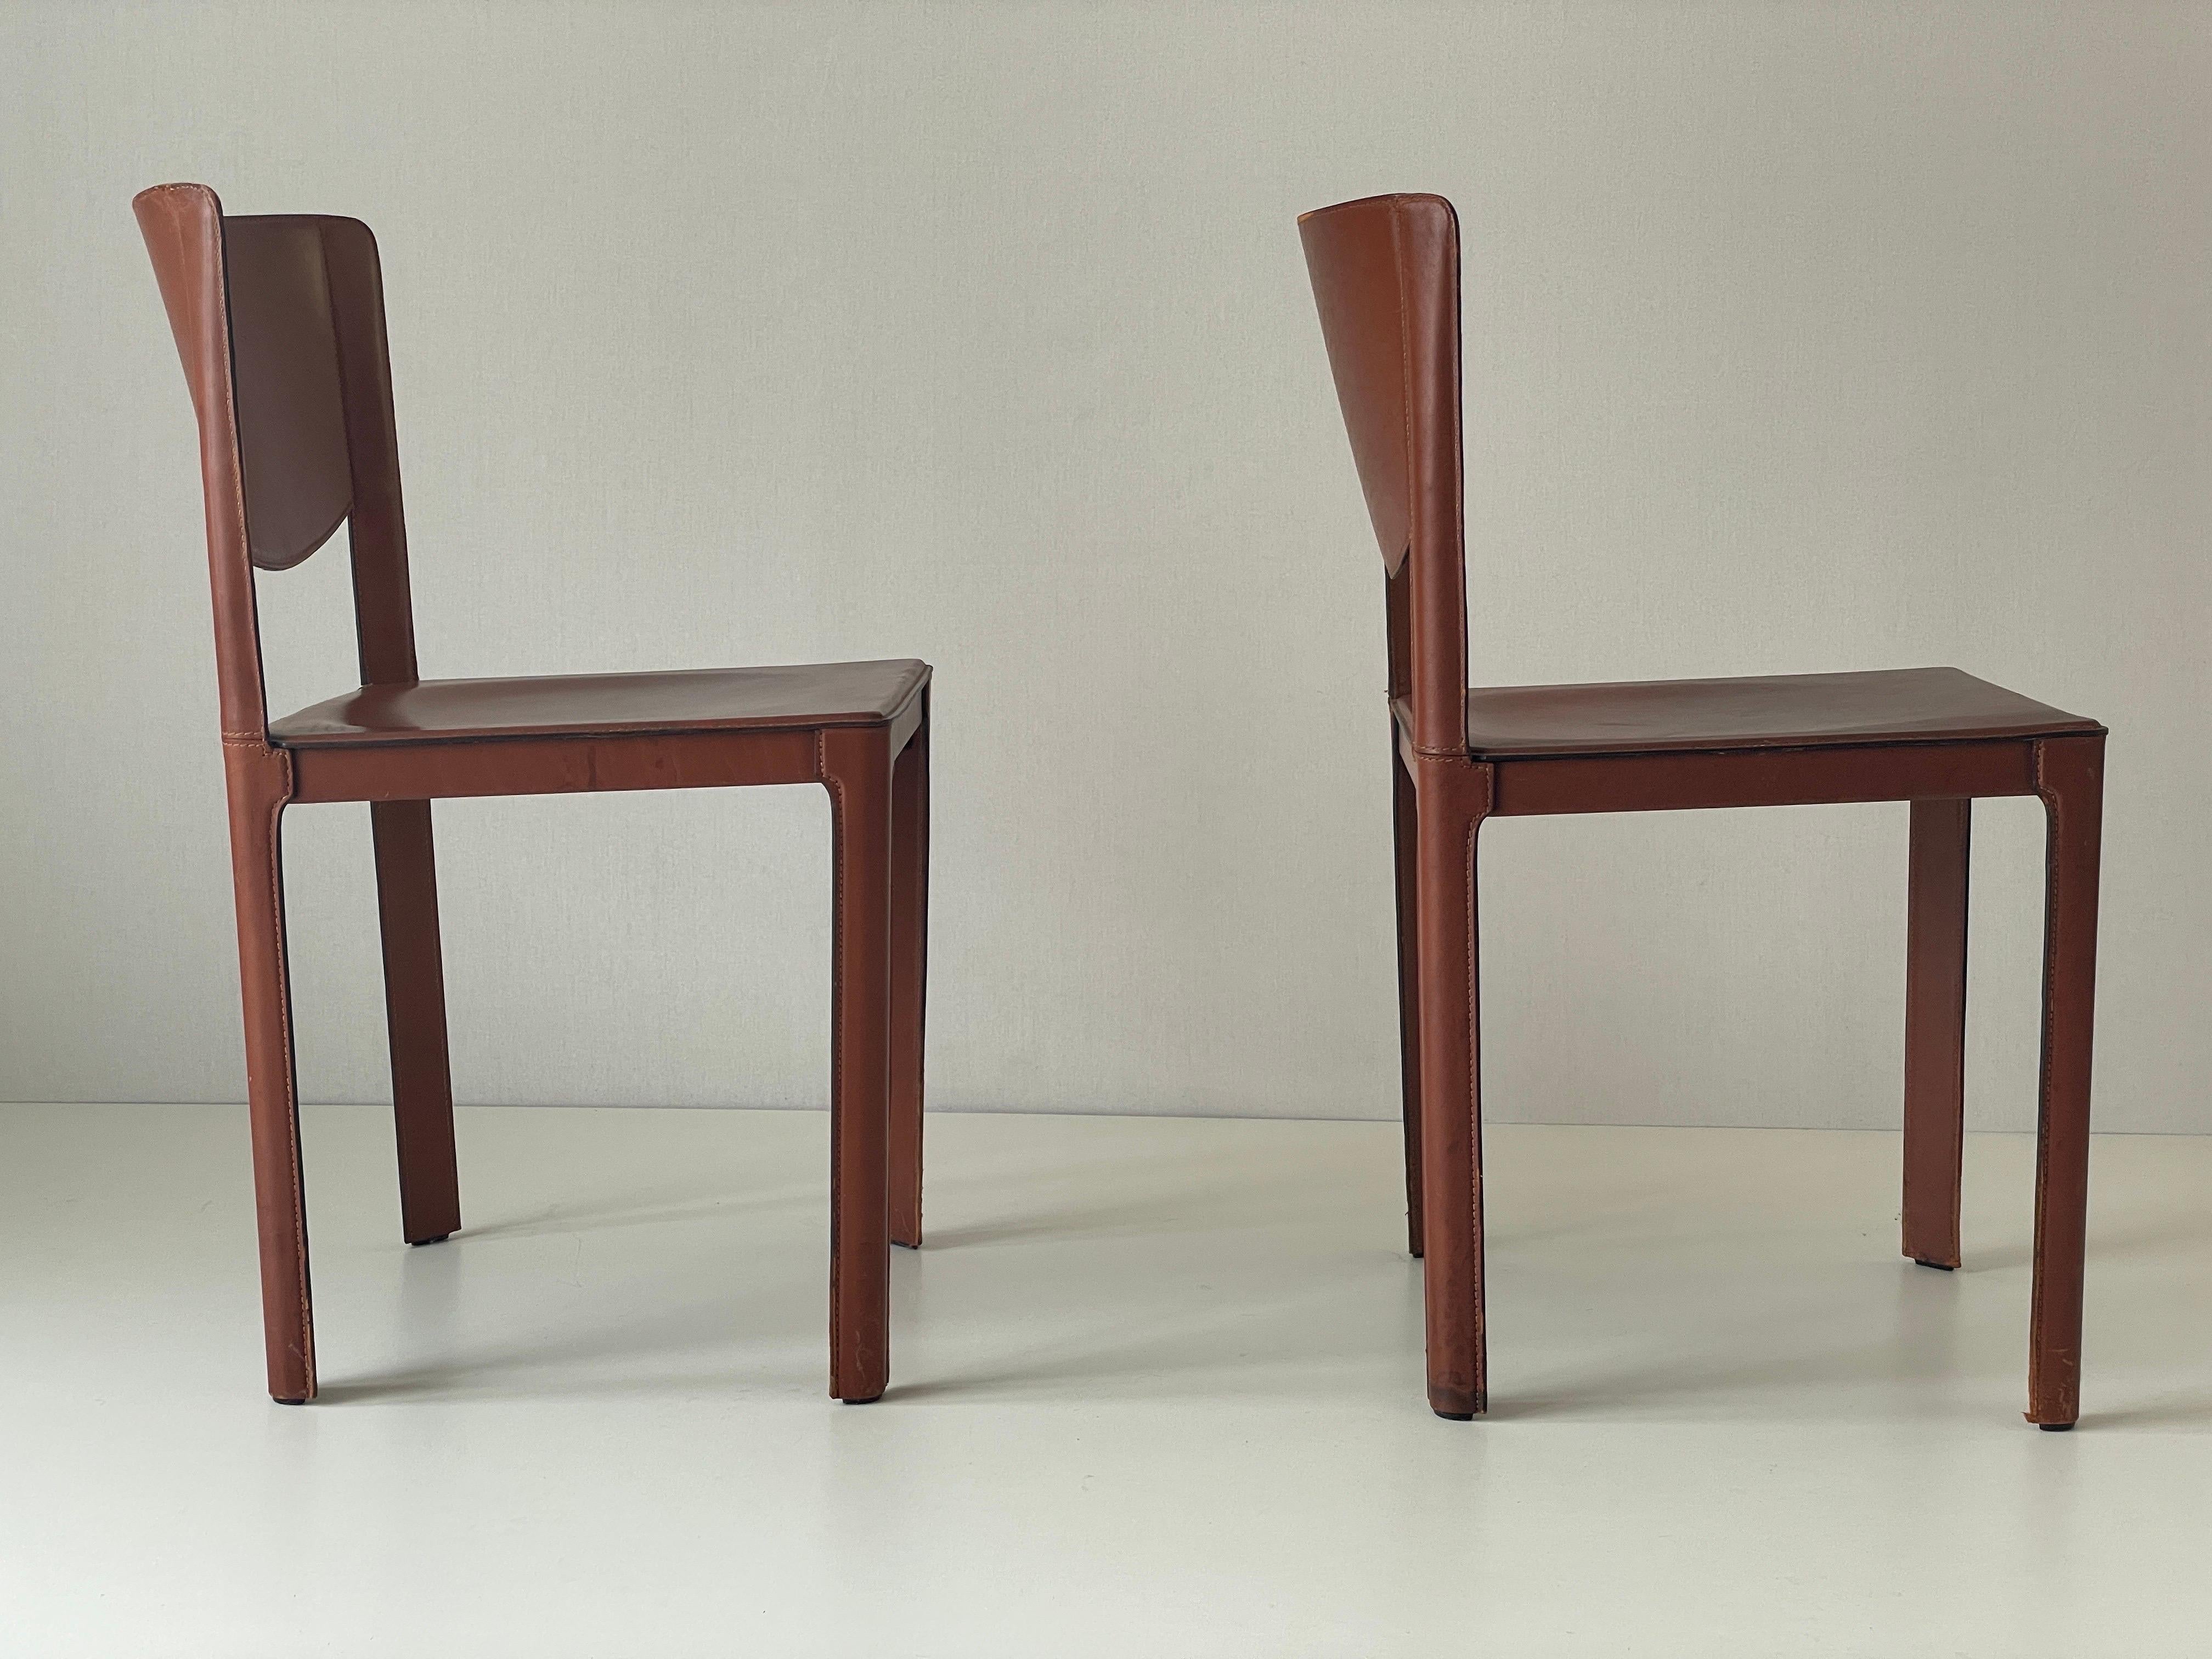 Pair of Italian Brown Leather Chairs by Matteo Grassi, 1970s, Italy For Sale 4